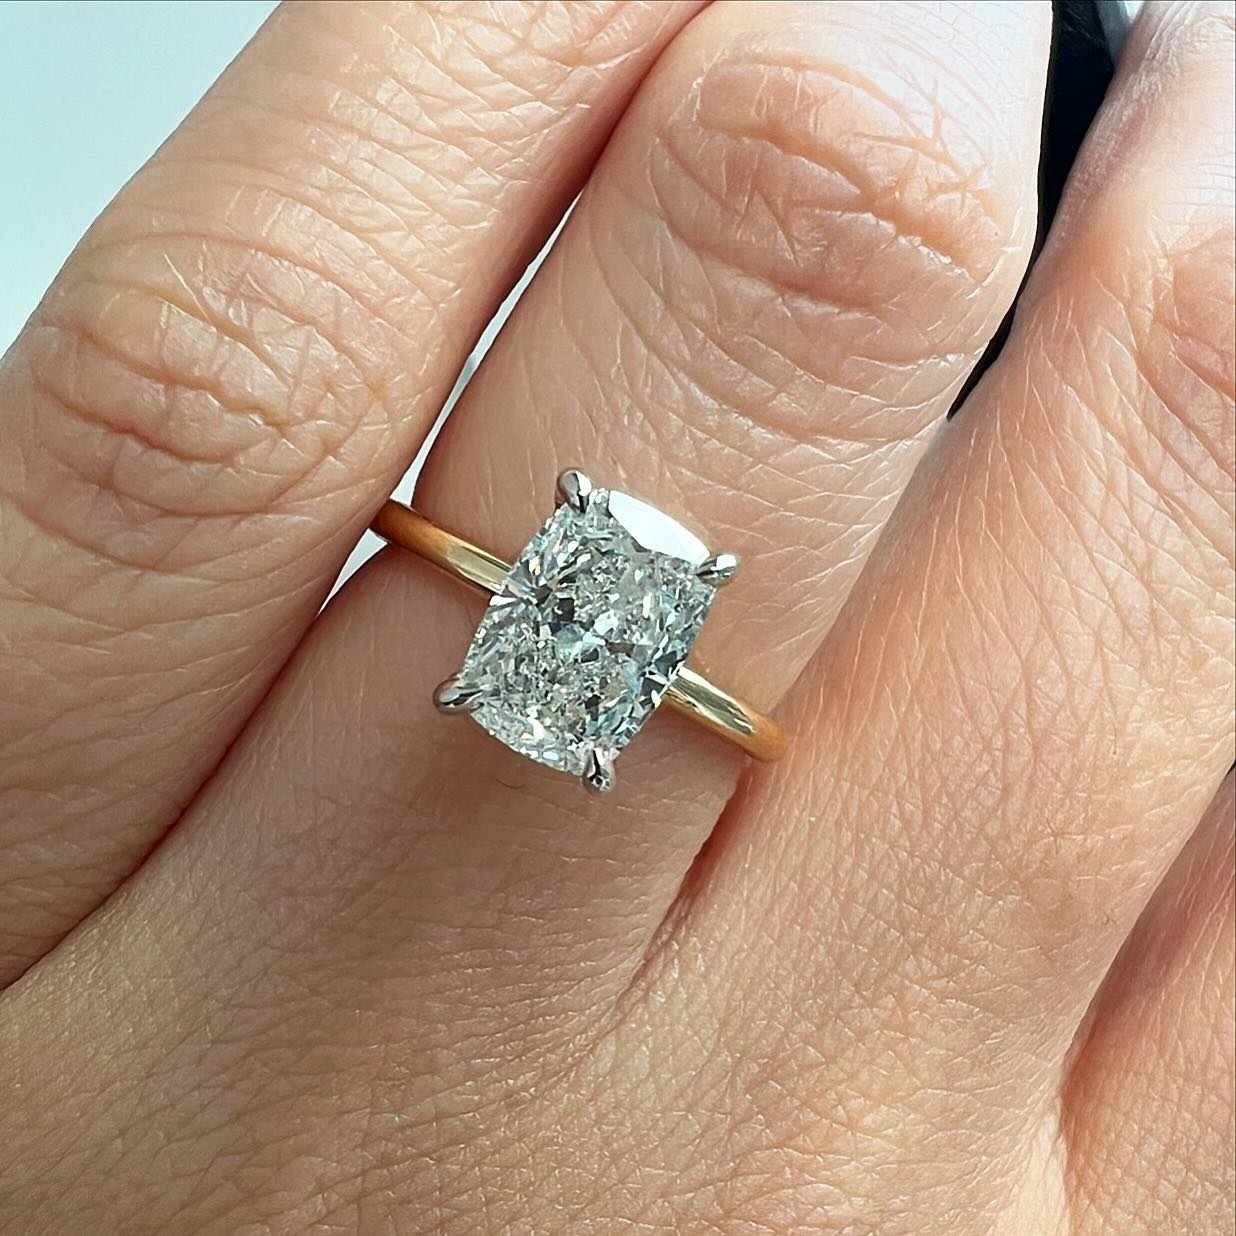 Cushion cut perfection! This 2ct elongated cushion is going to a very sweet couple! Congrats!